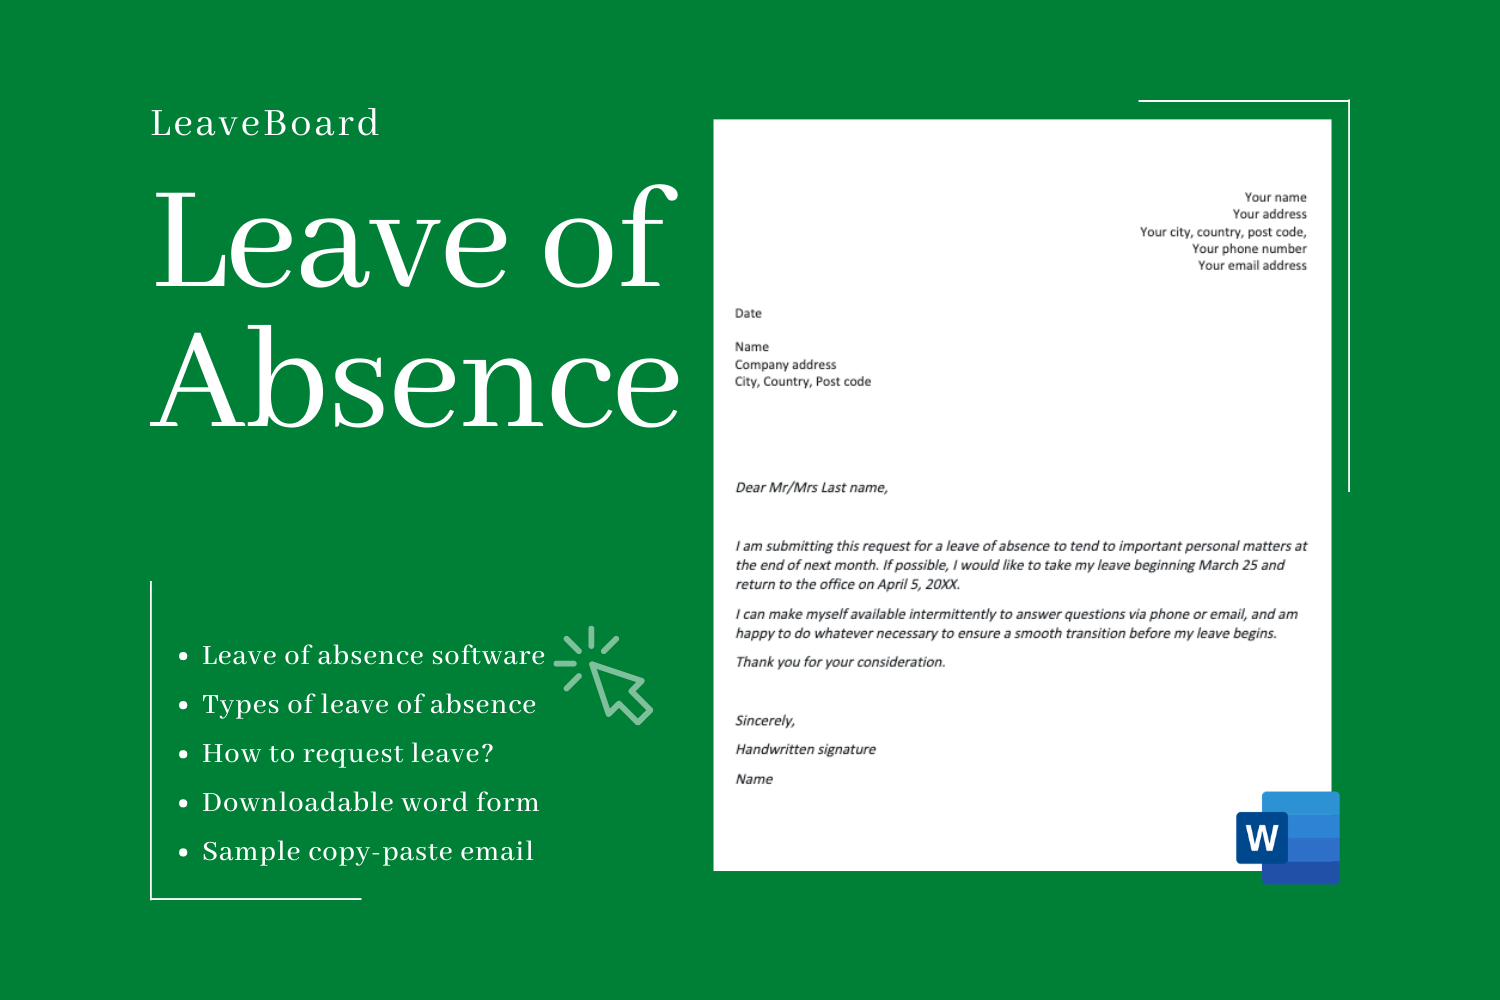 Leave of absence - Learn how to take leave of absence from work